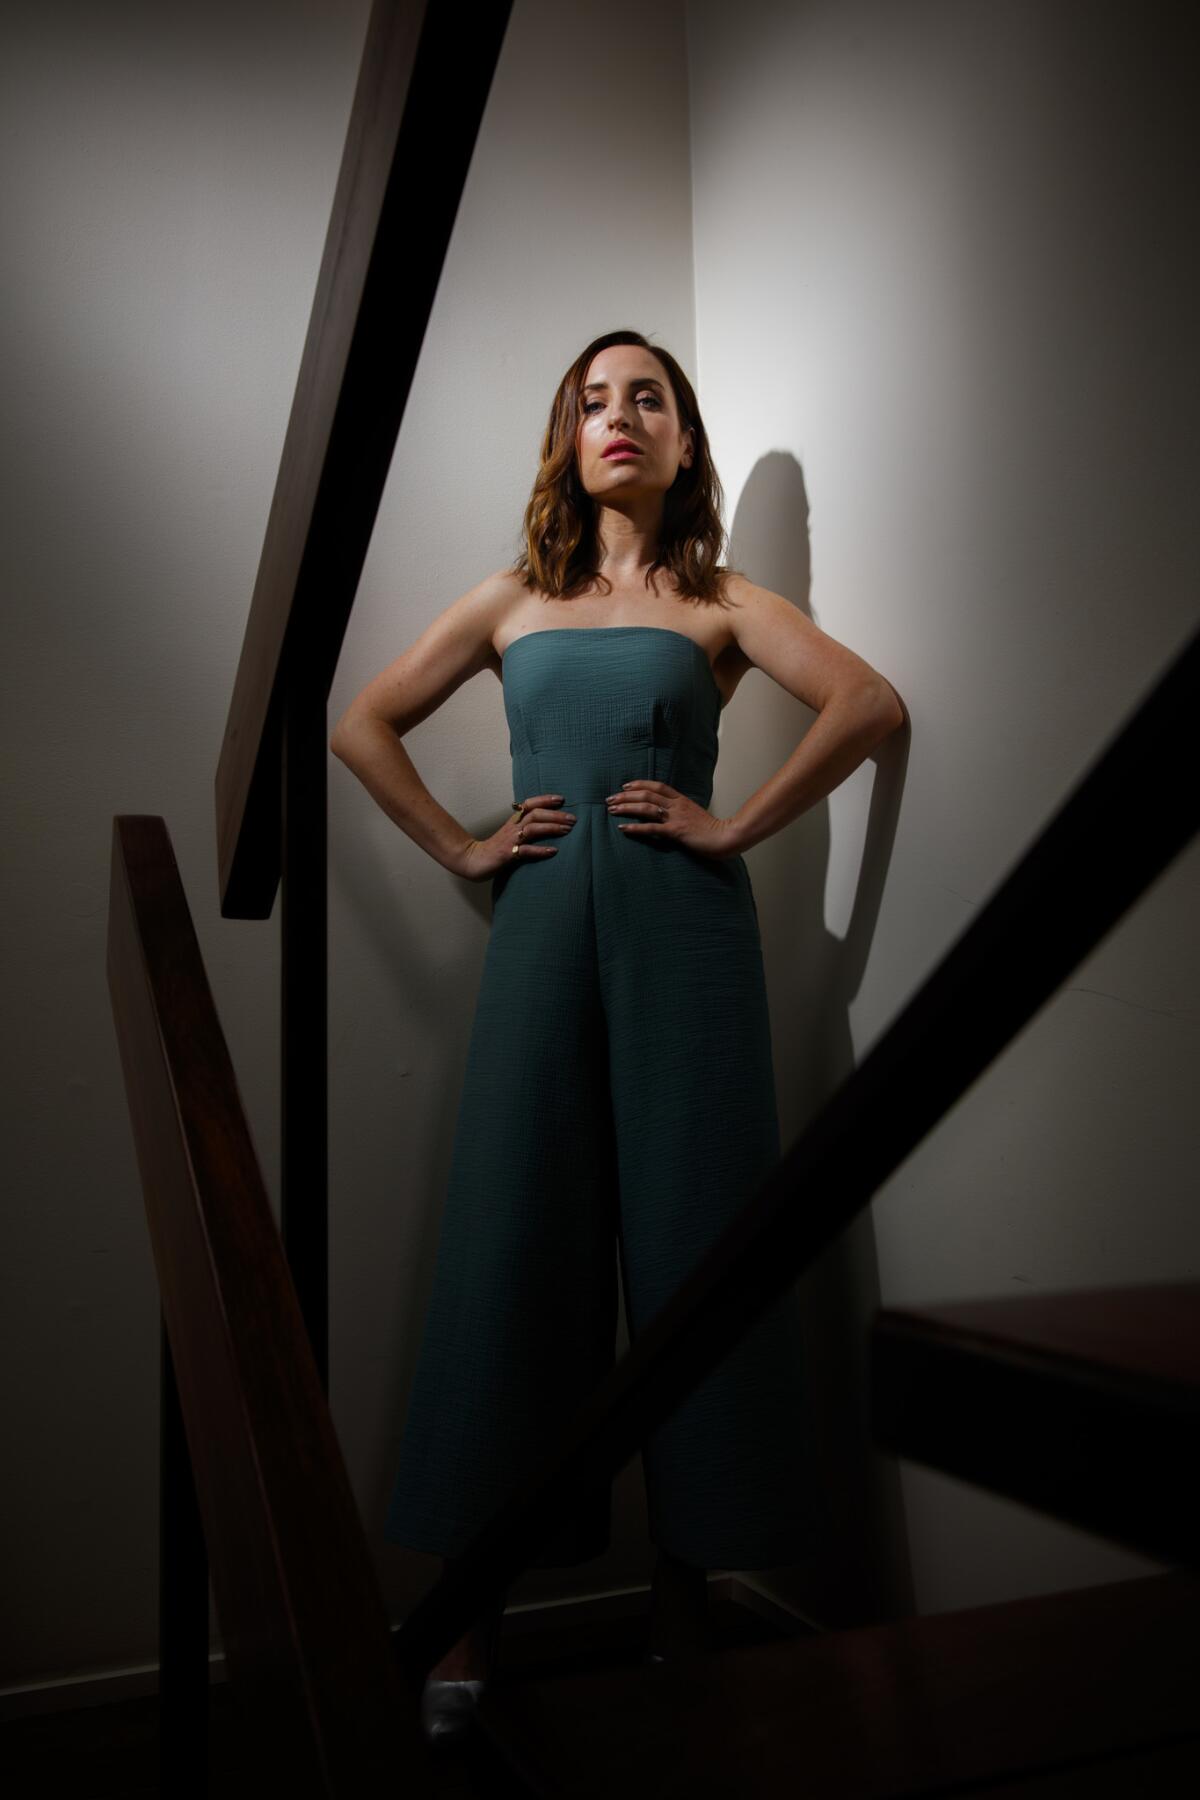 Actress and director Zoe Lister-Jones. (Jay L. Clendenin / Los Angeles Times)